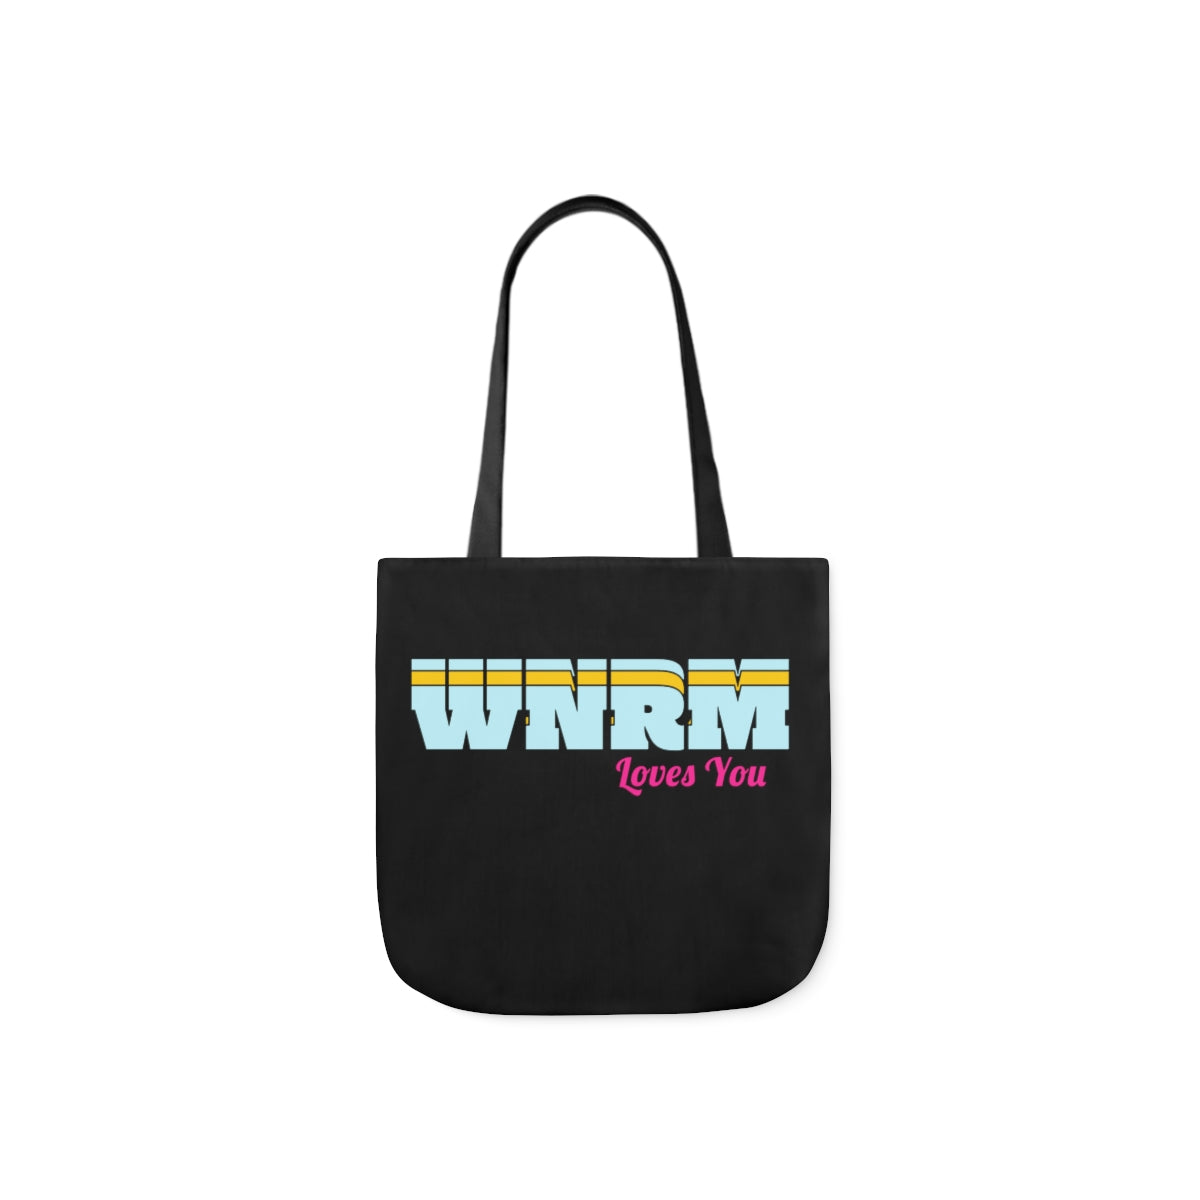 WNRM Loves You Polyester Canvas Tote Bag black, on white background